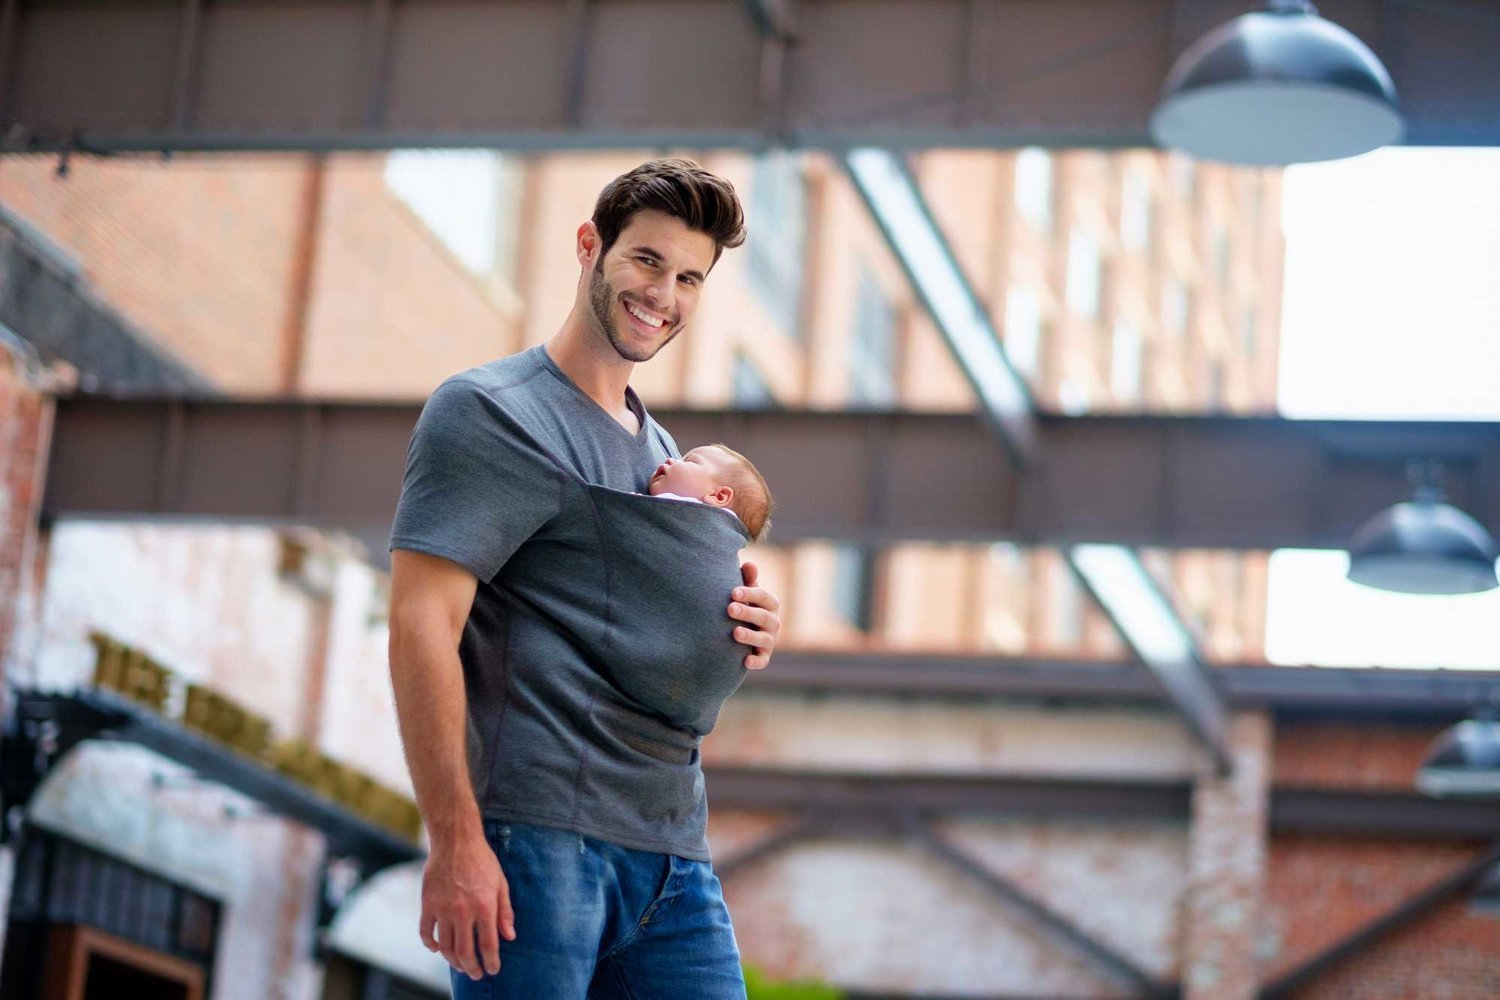 dad t shirt baby carrier